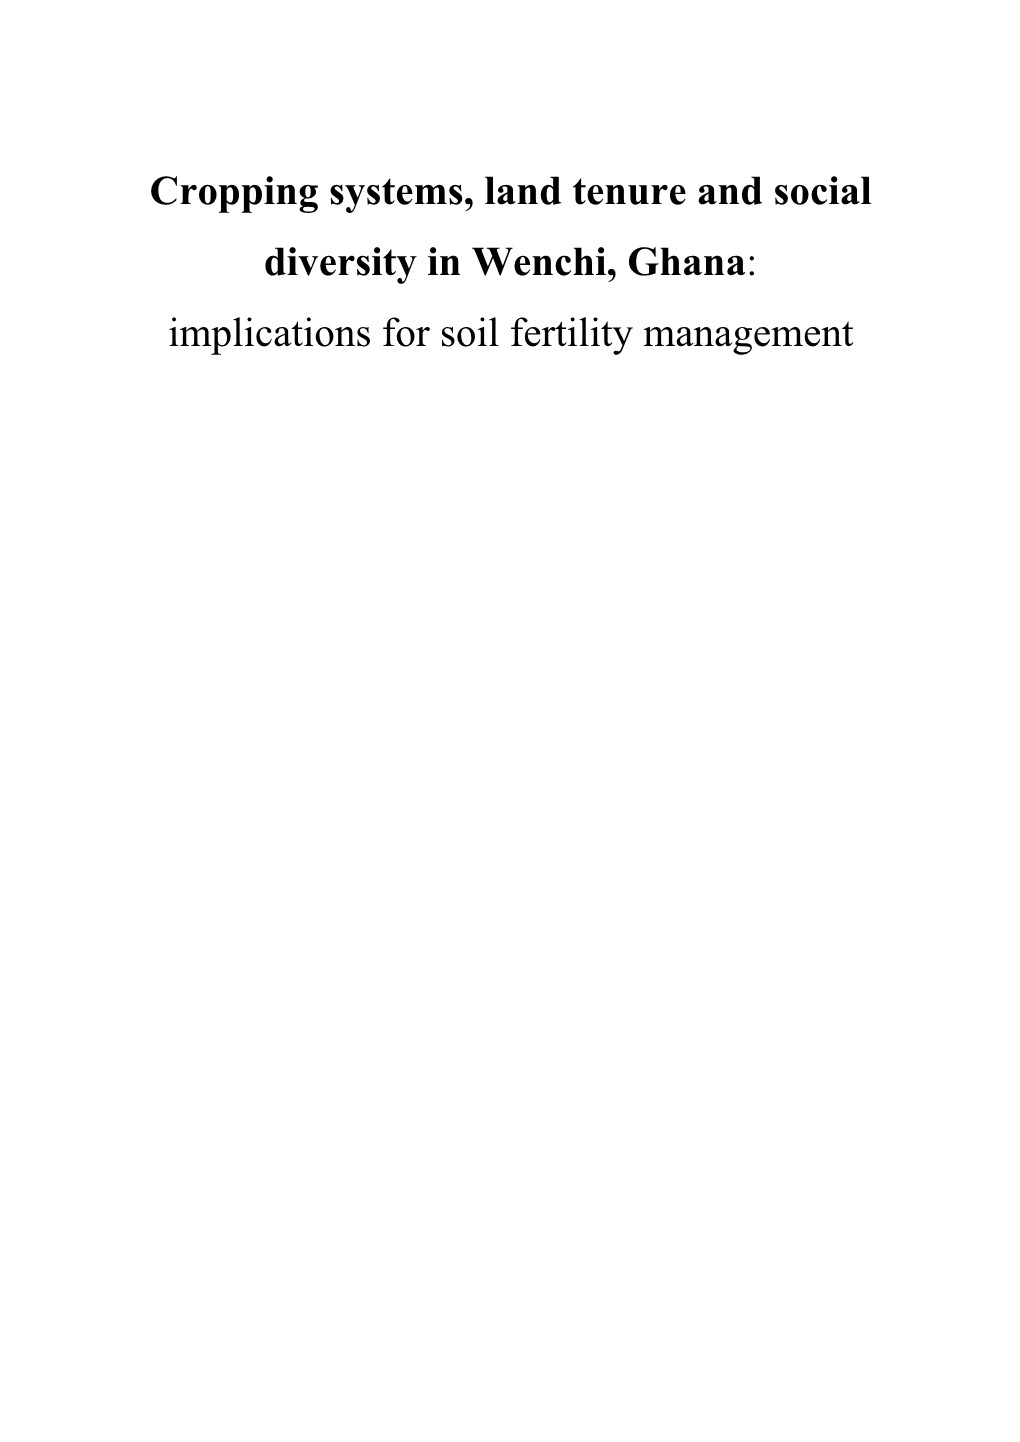 Cropping Systems, Land Tenure and Social Diversity in Wenchi, Ghana: Implications for Soil Fertility Management